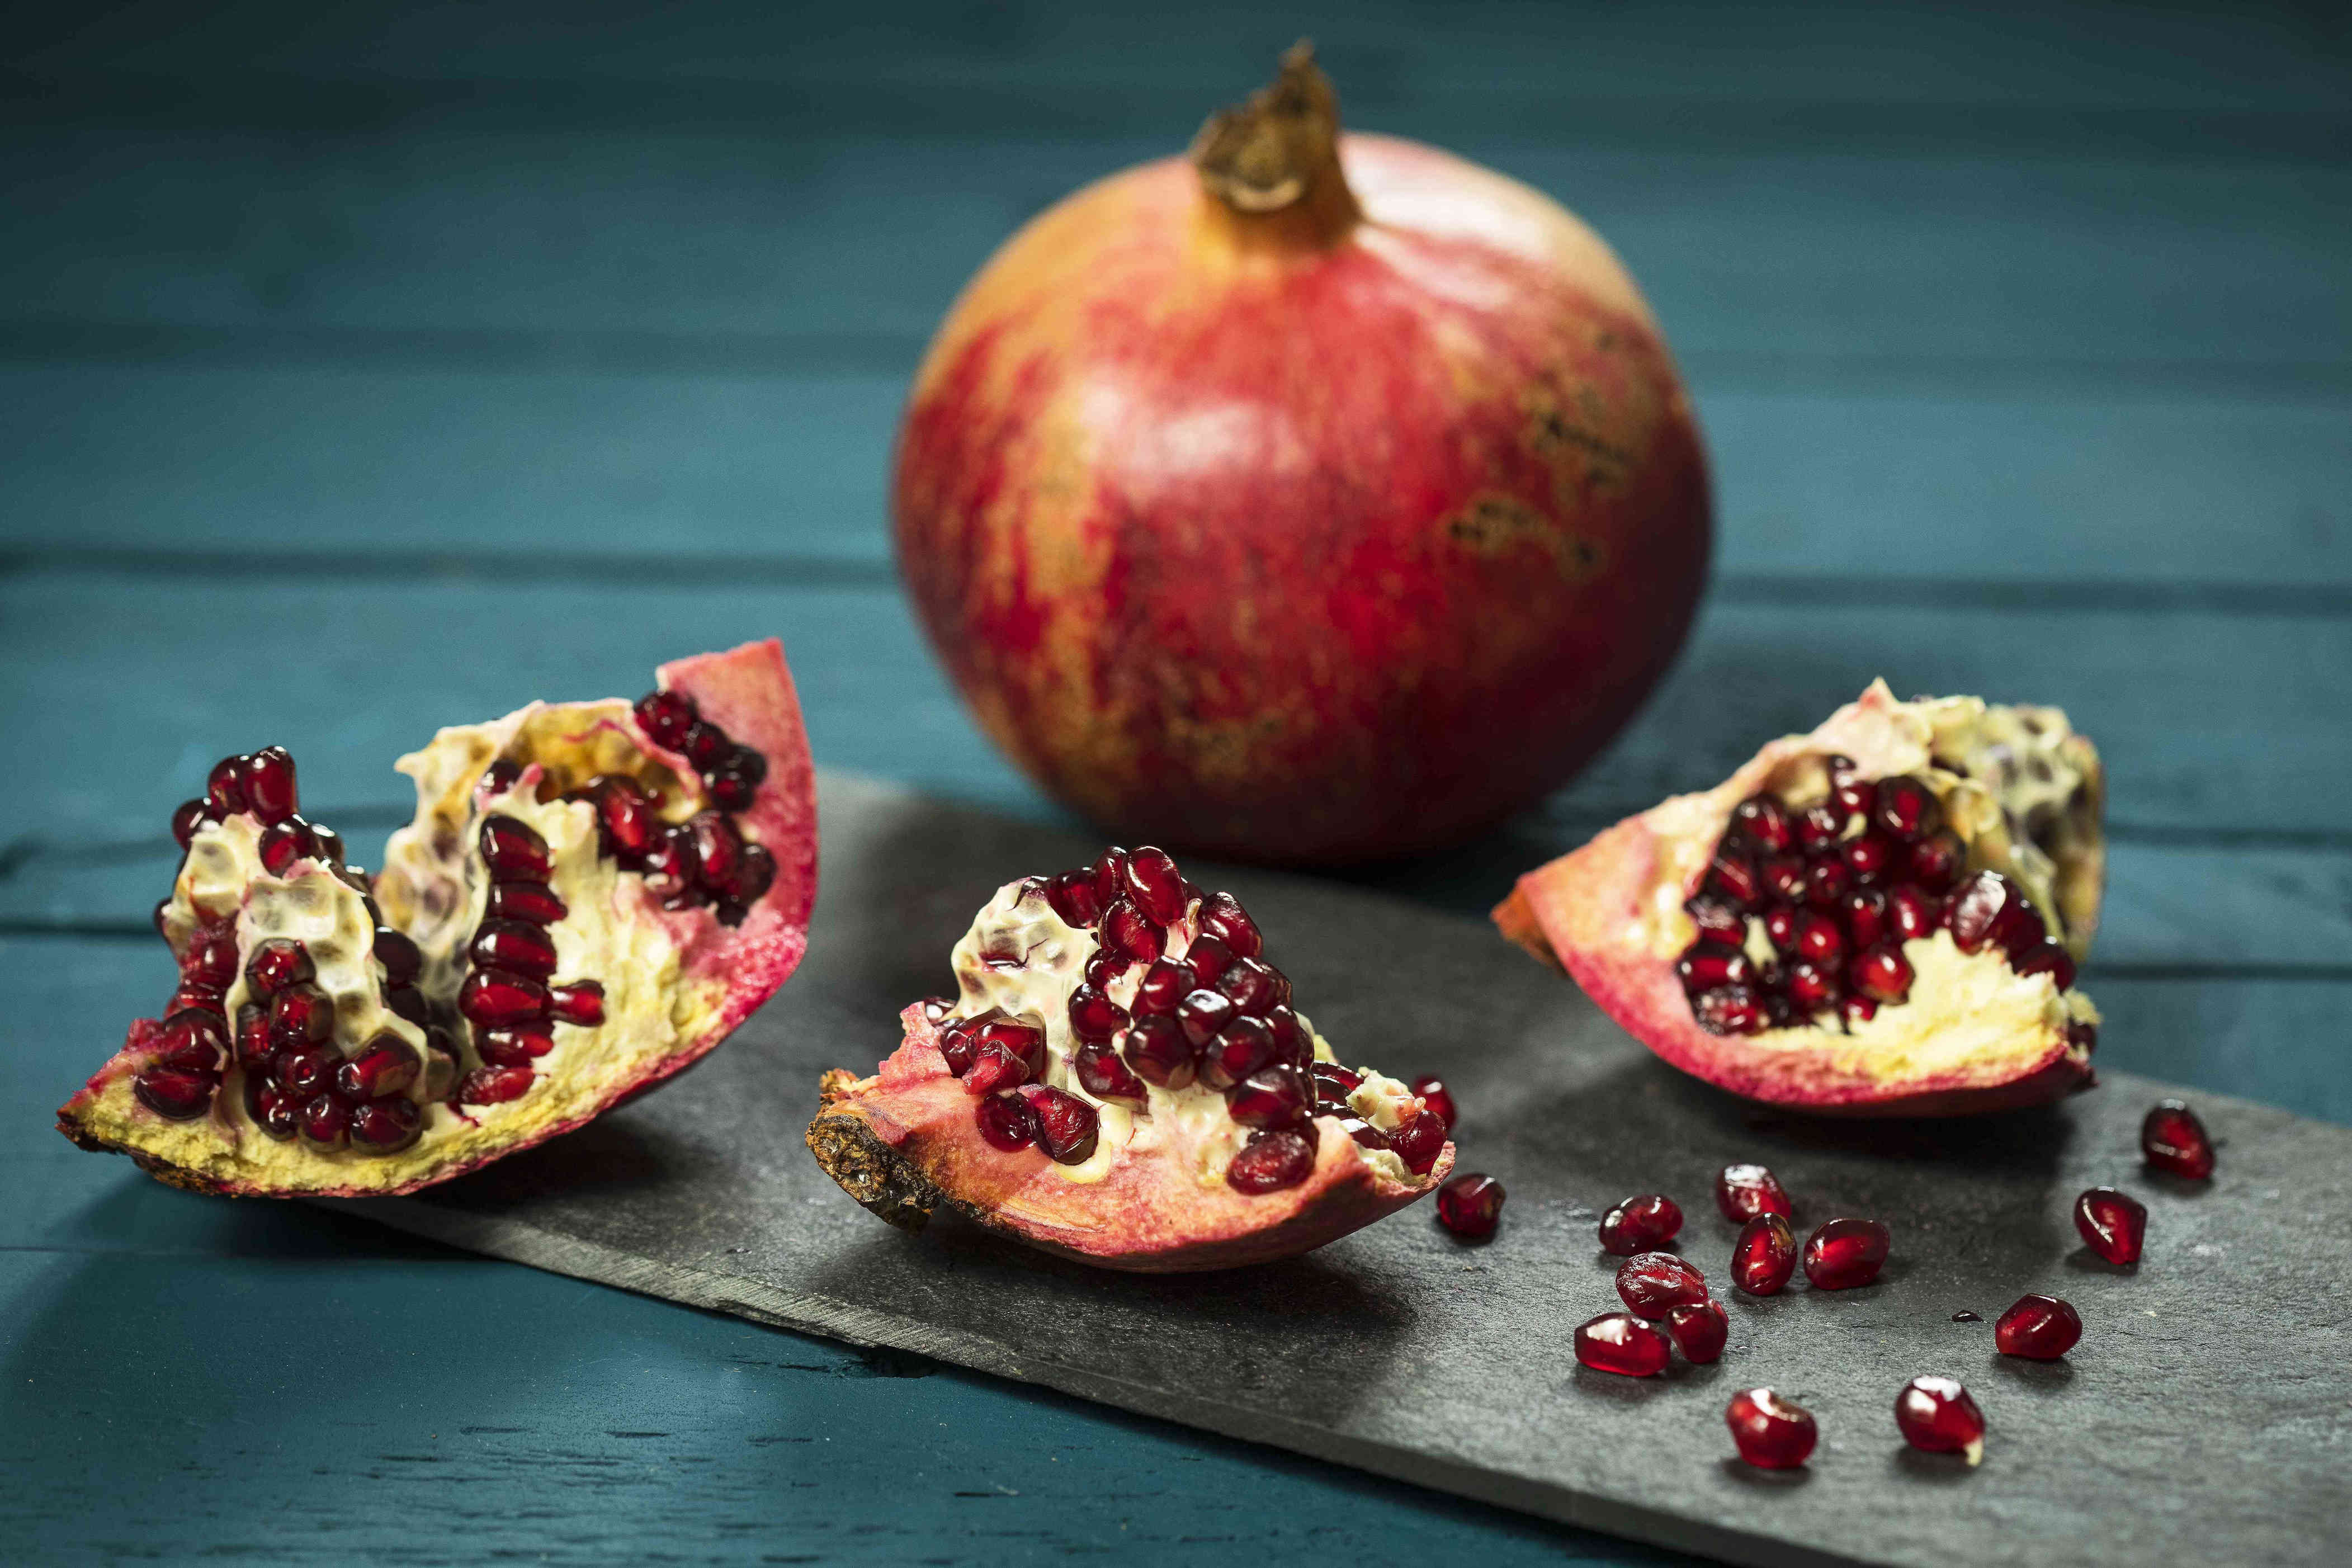 can you eat pomegranate seeds?